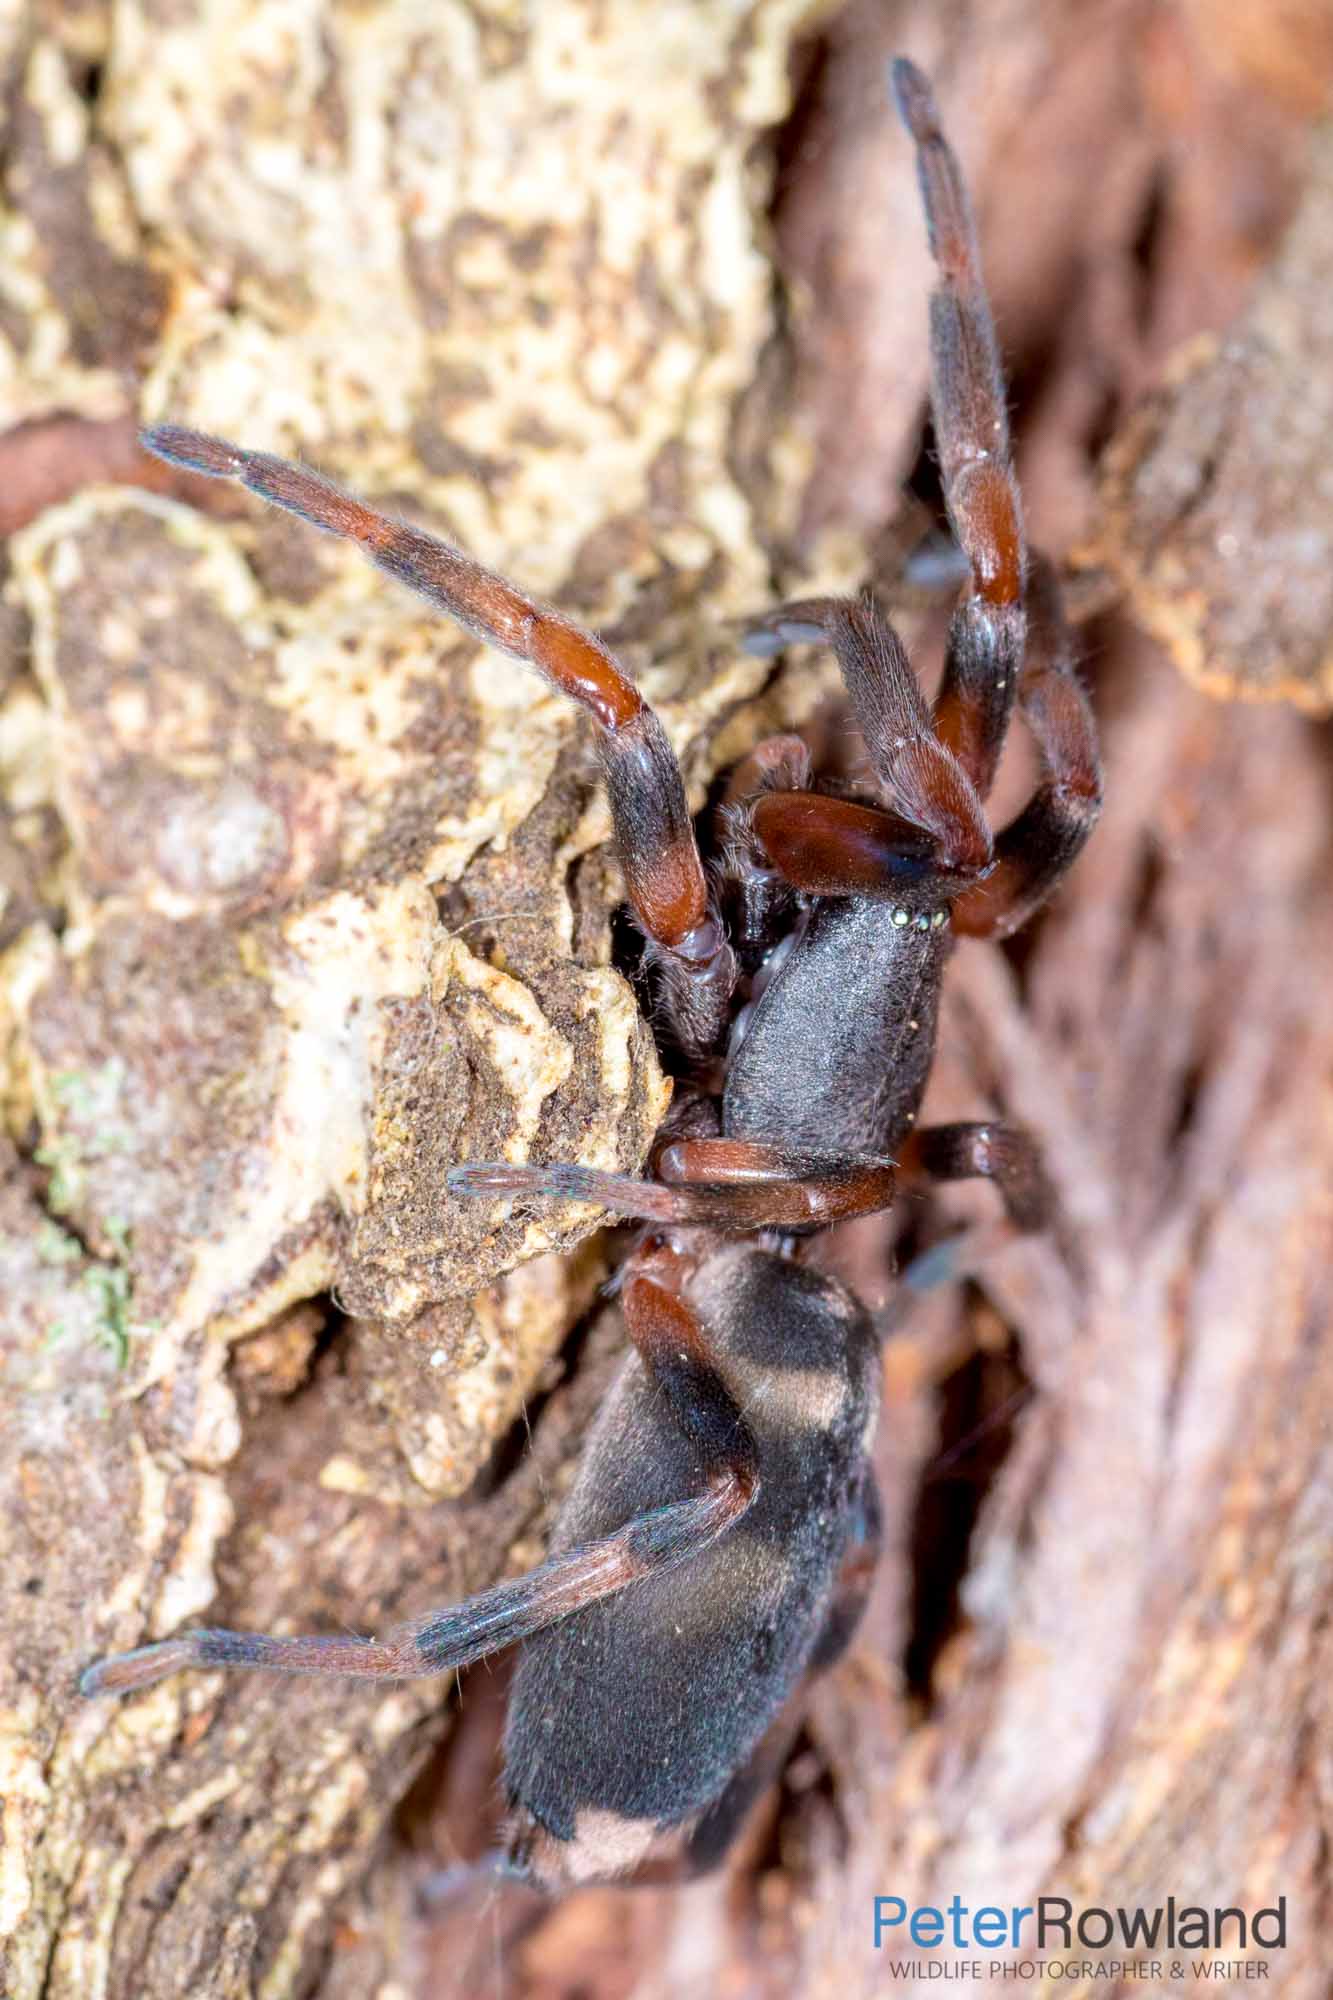 A White-tailed Spider emerging from a crevice in a tree